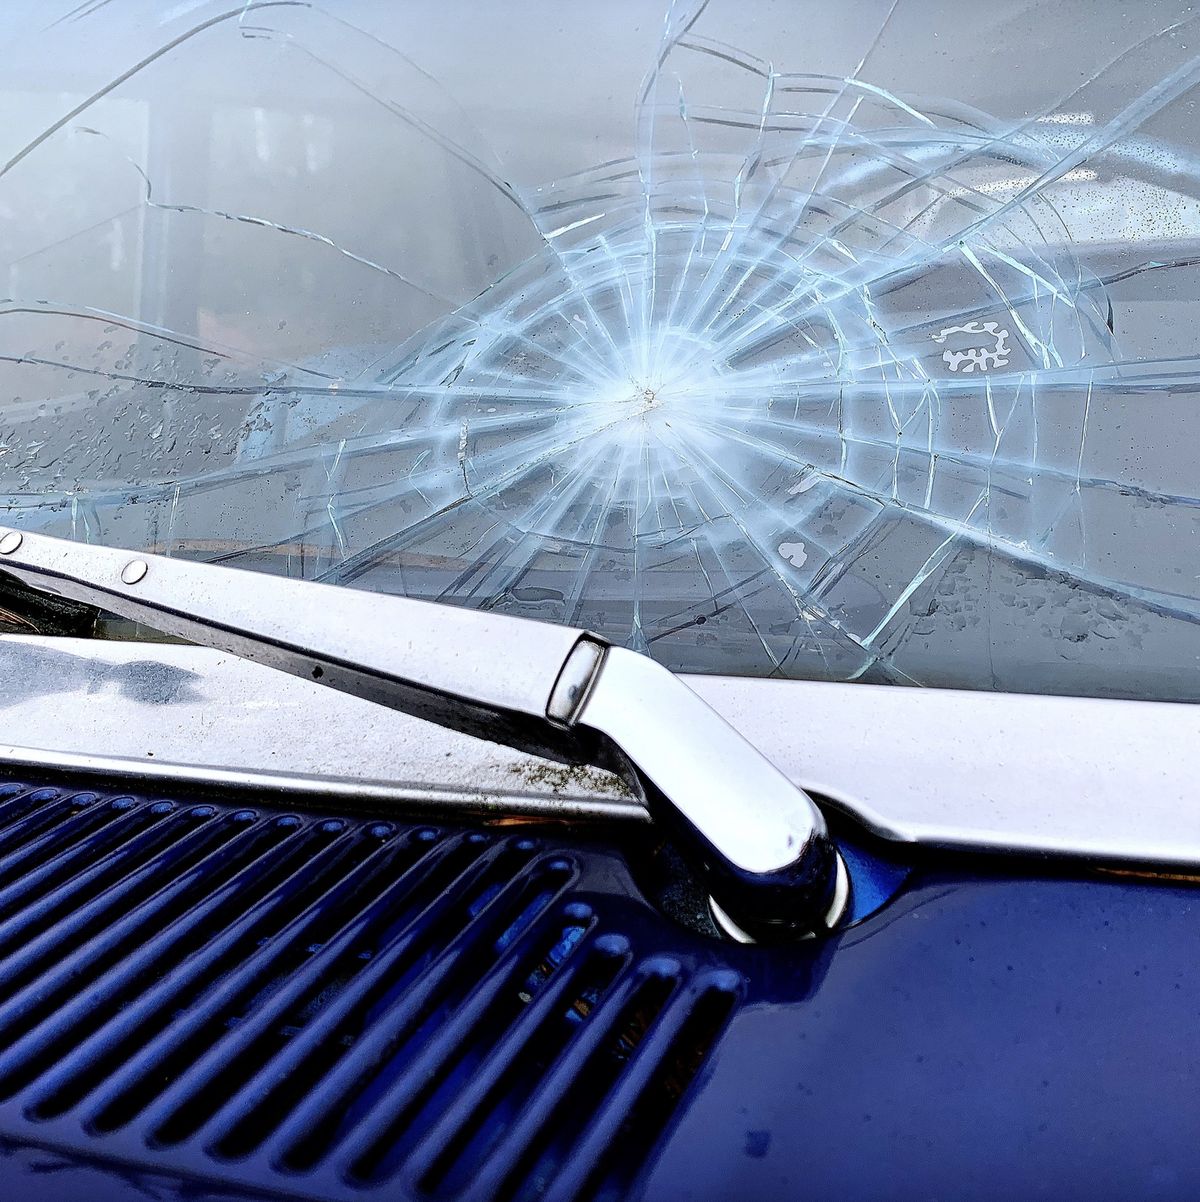 Cracked Windshield Repair | Fix Chipped Windshield Glass